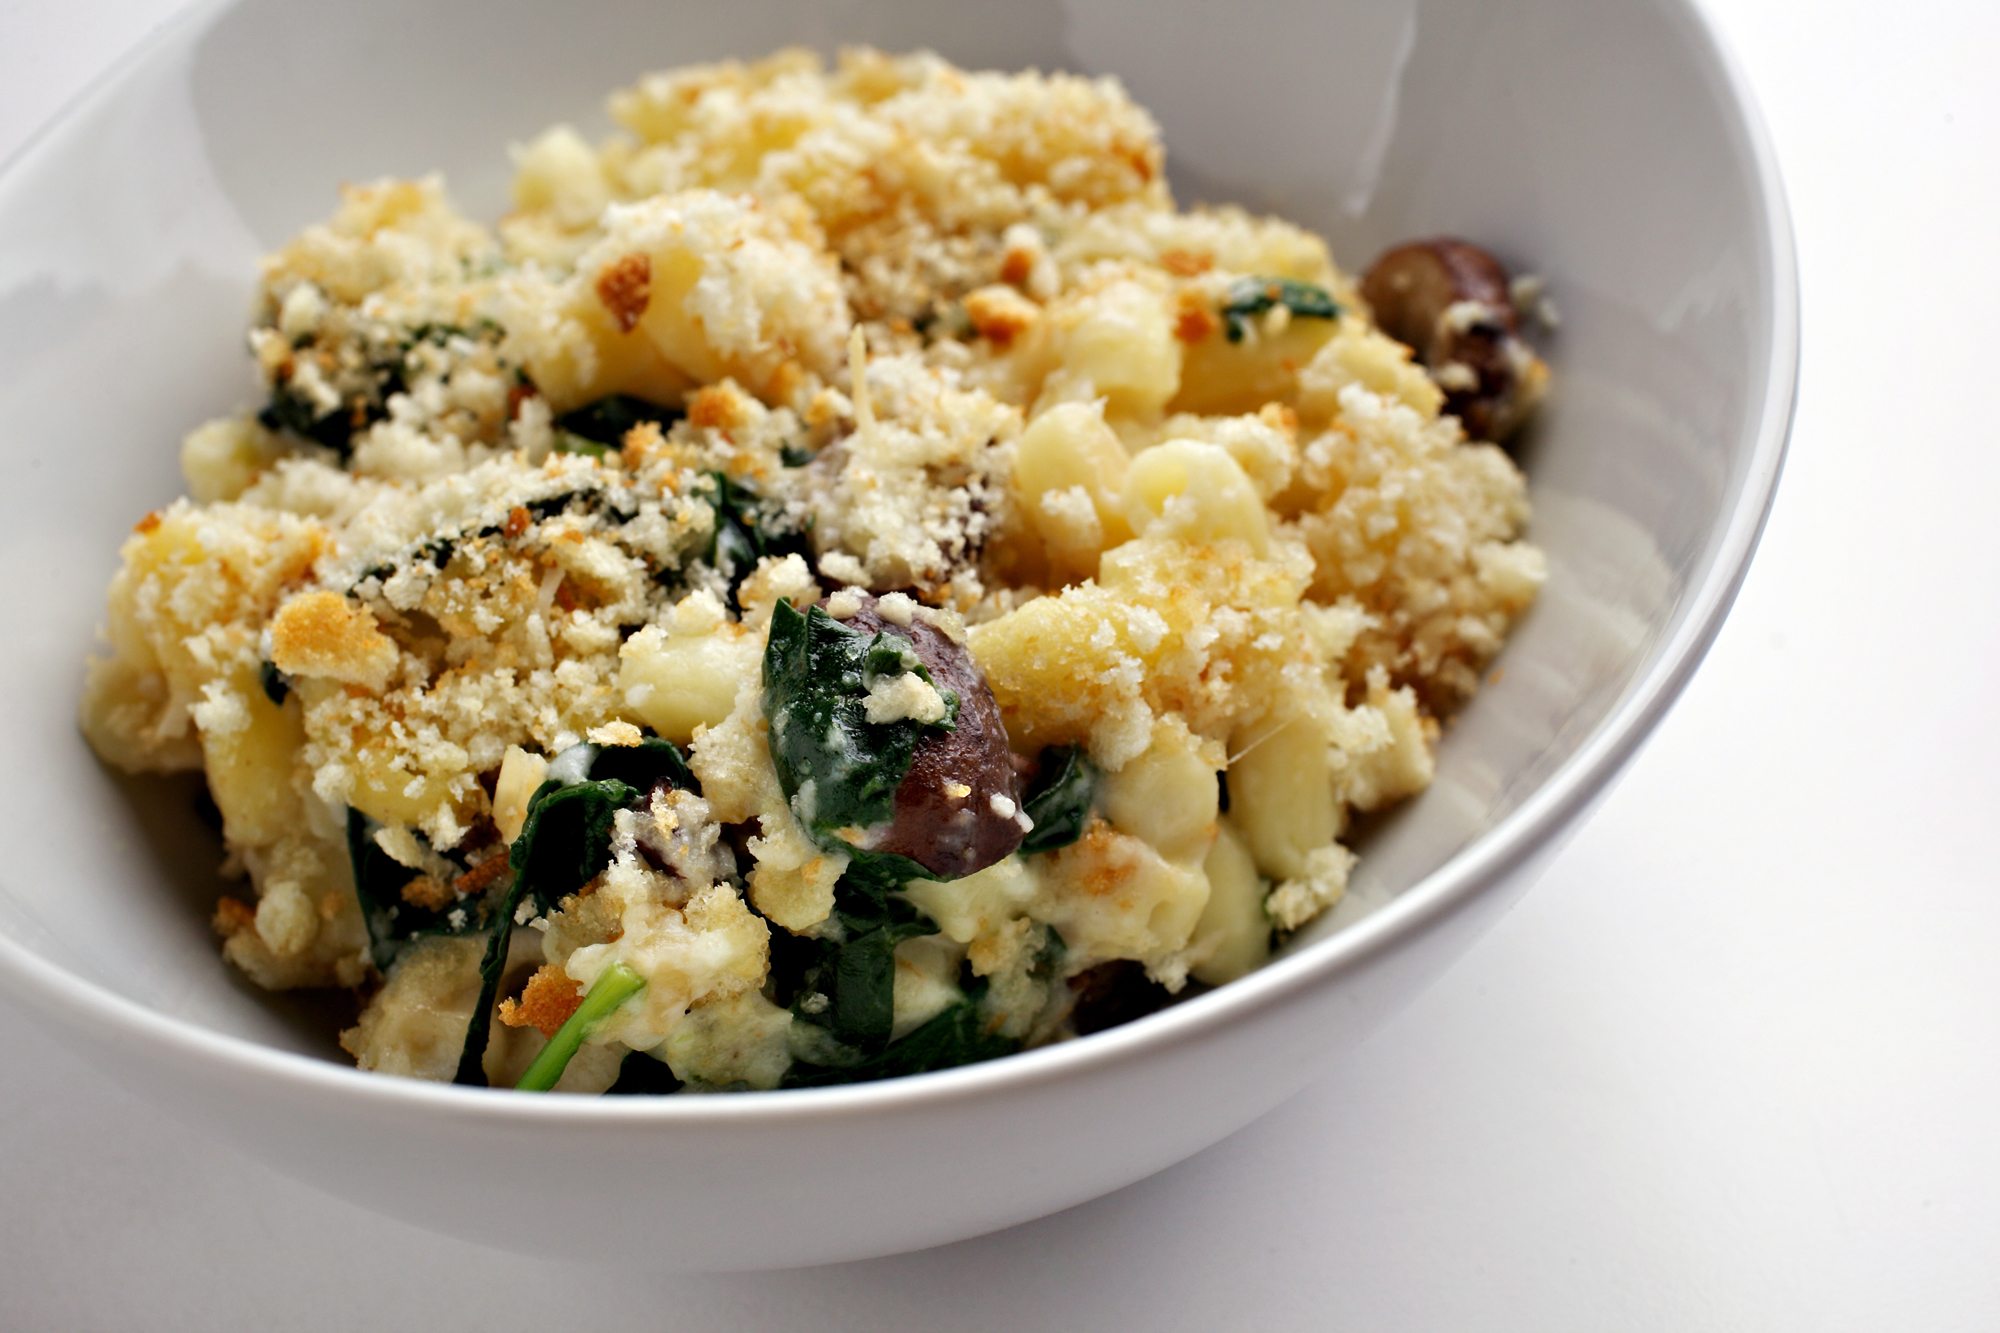 Mushrooms and spinach add nutrition and flavor to a basic mac and cheese.